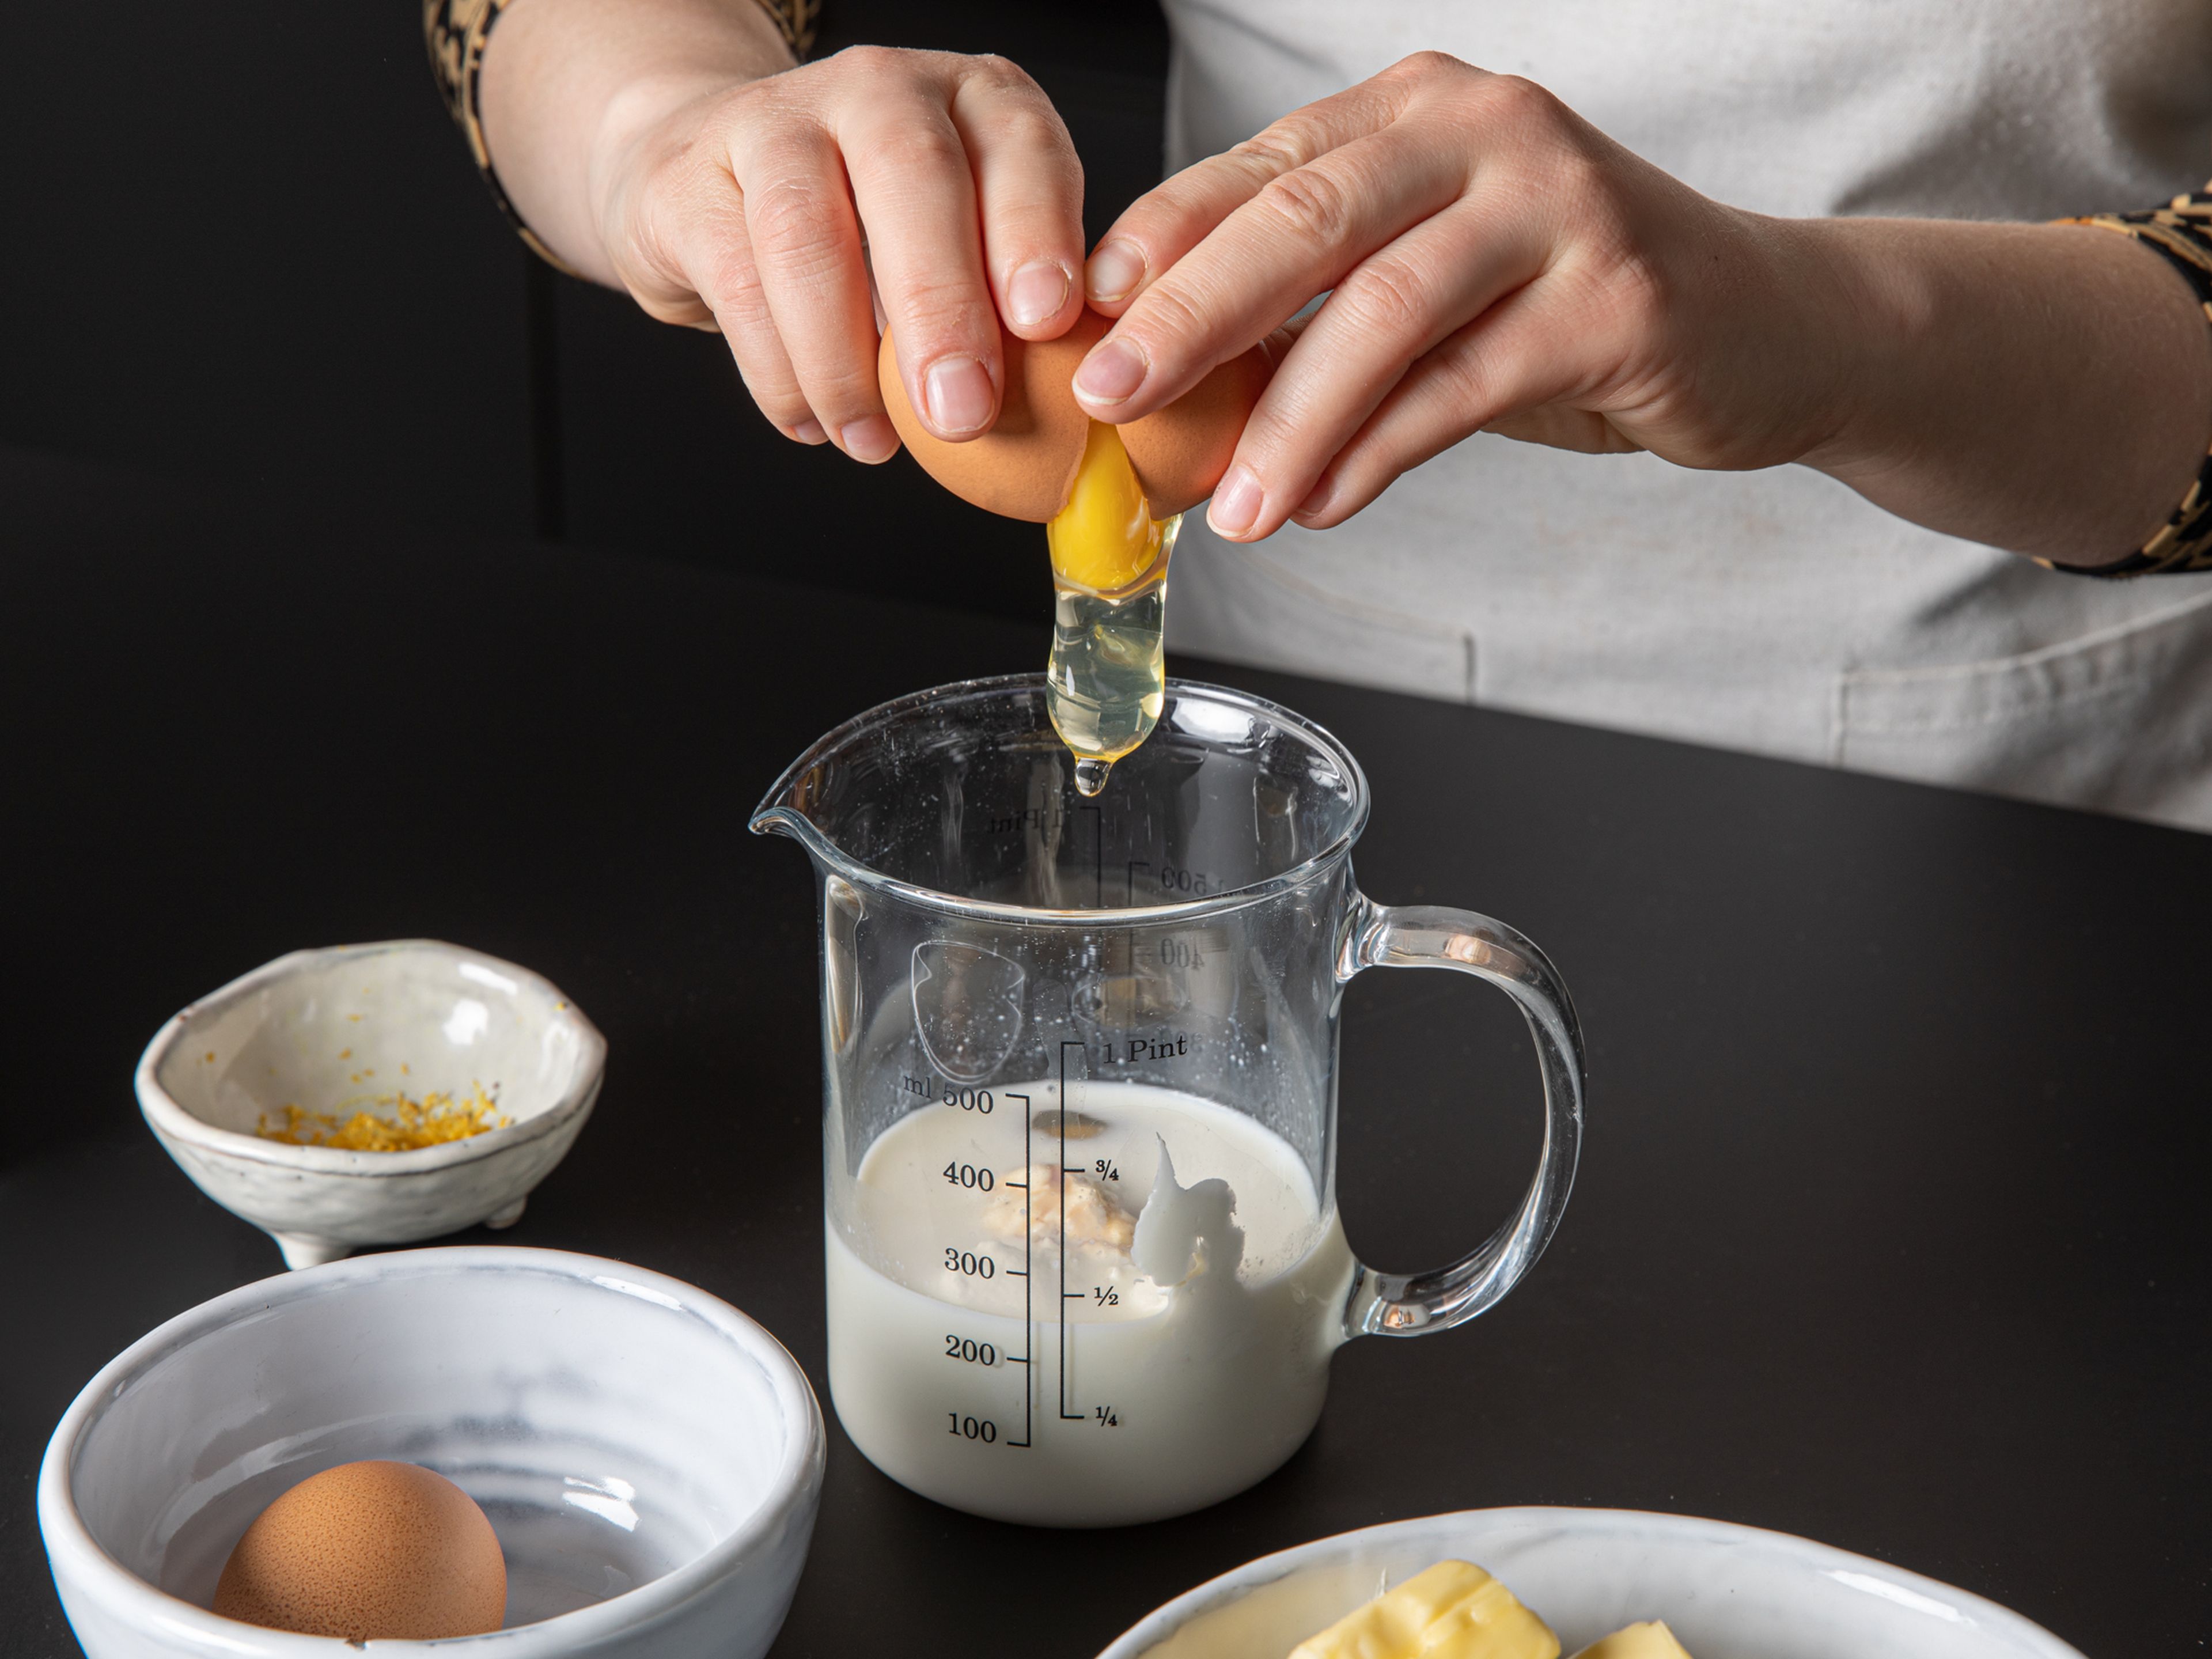 Grease the springform pan and line with baking paper. Mix flour with baking powder, baking soda, sugar, and salt in the bowl of a stand mixer. Whisk eggs, milk, vanilla extract, yogurt, and lemon zest in a liquid measuring cup.